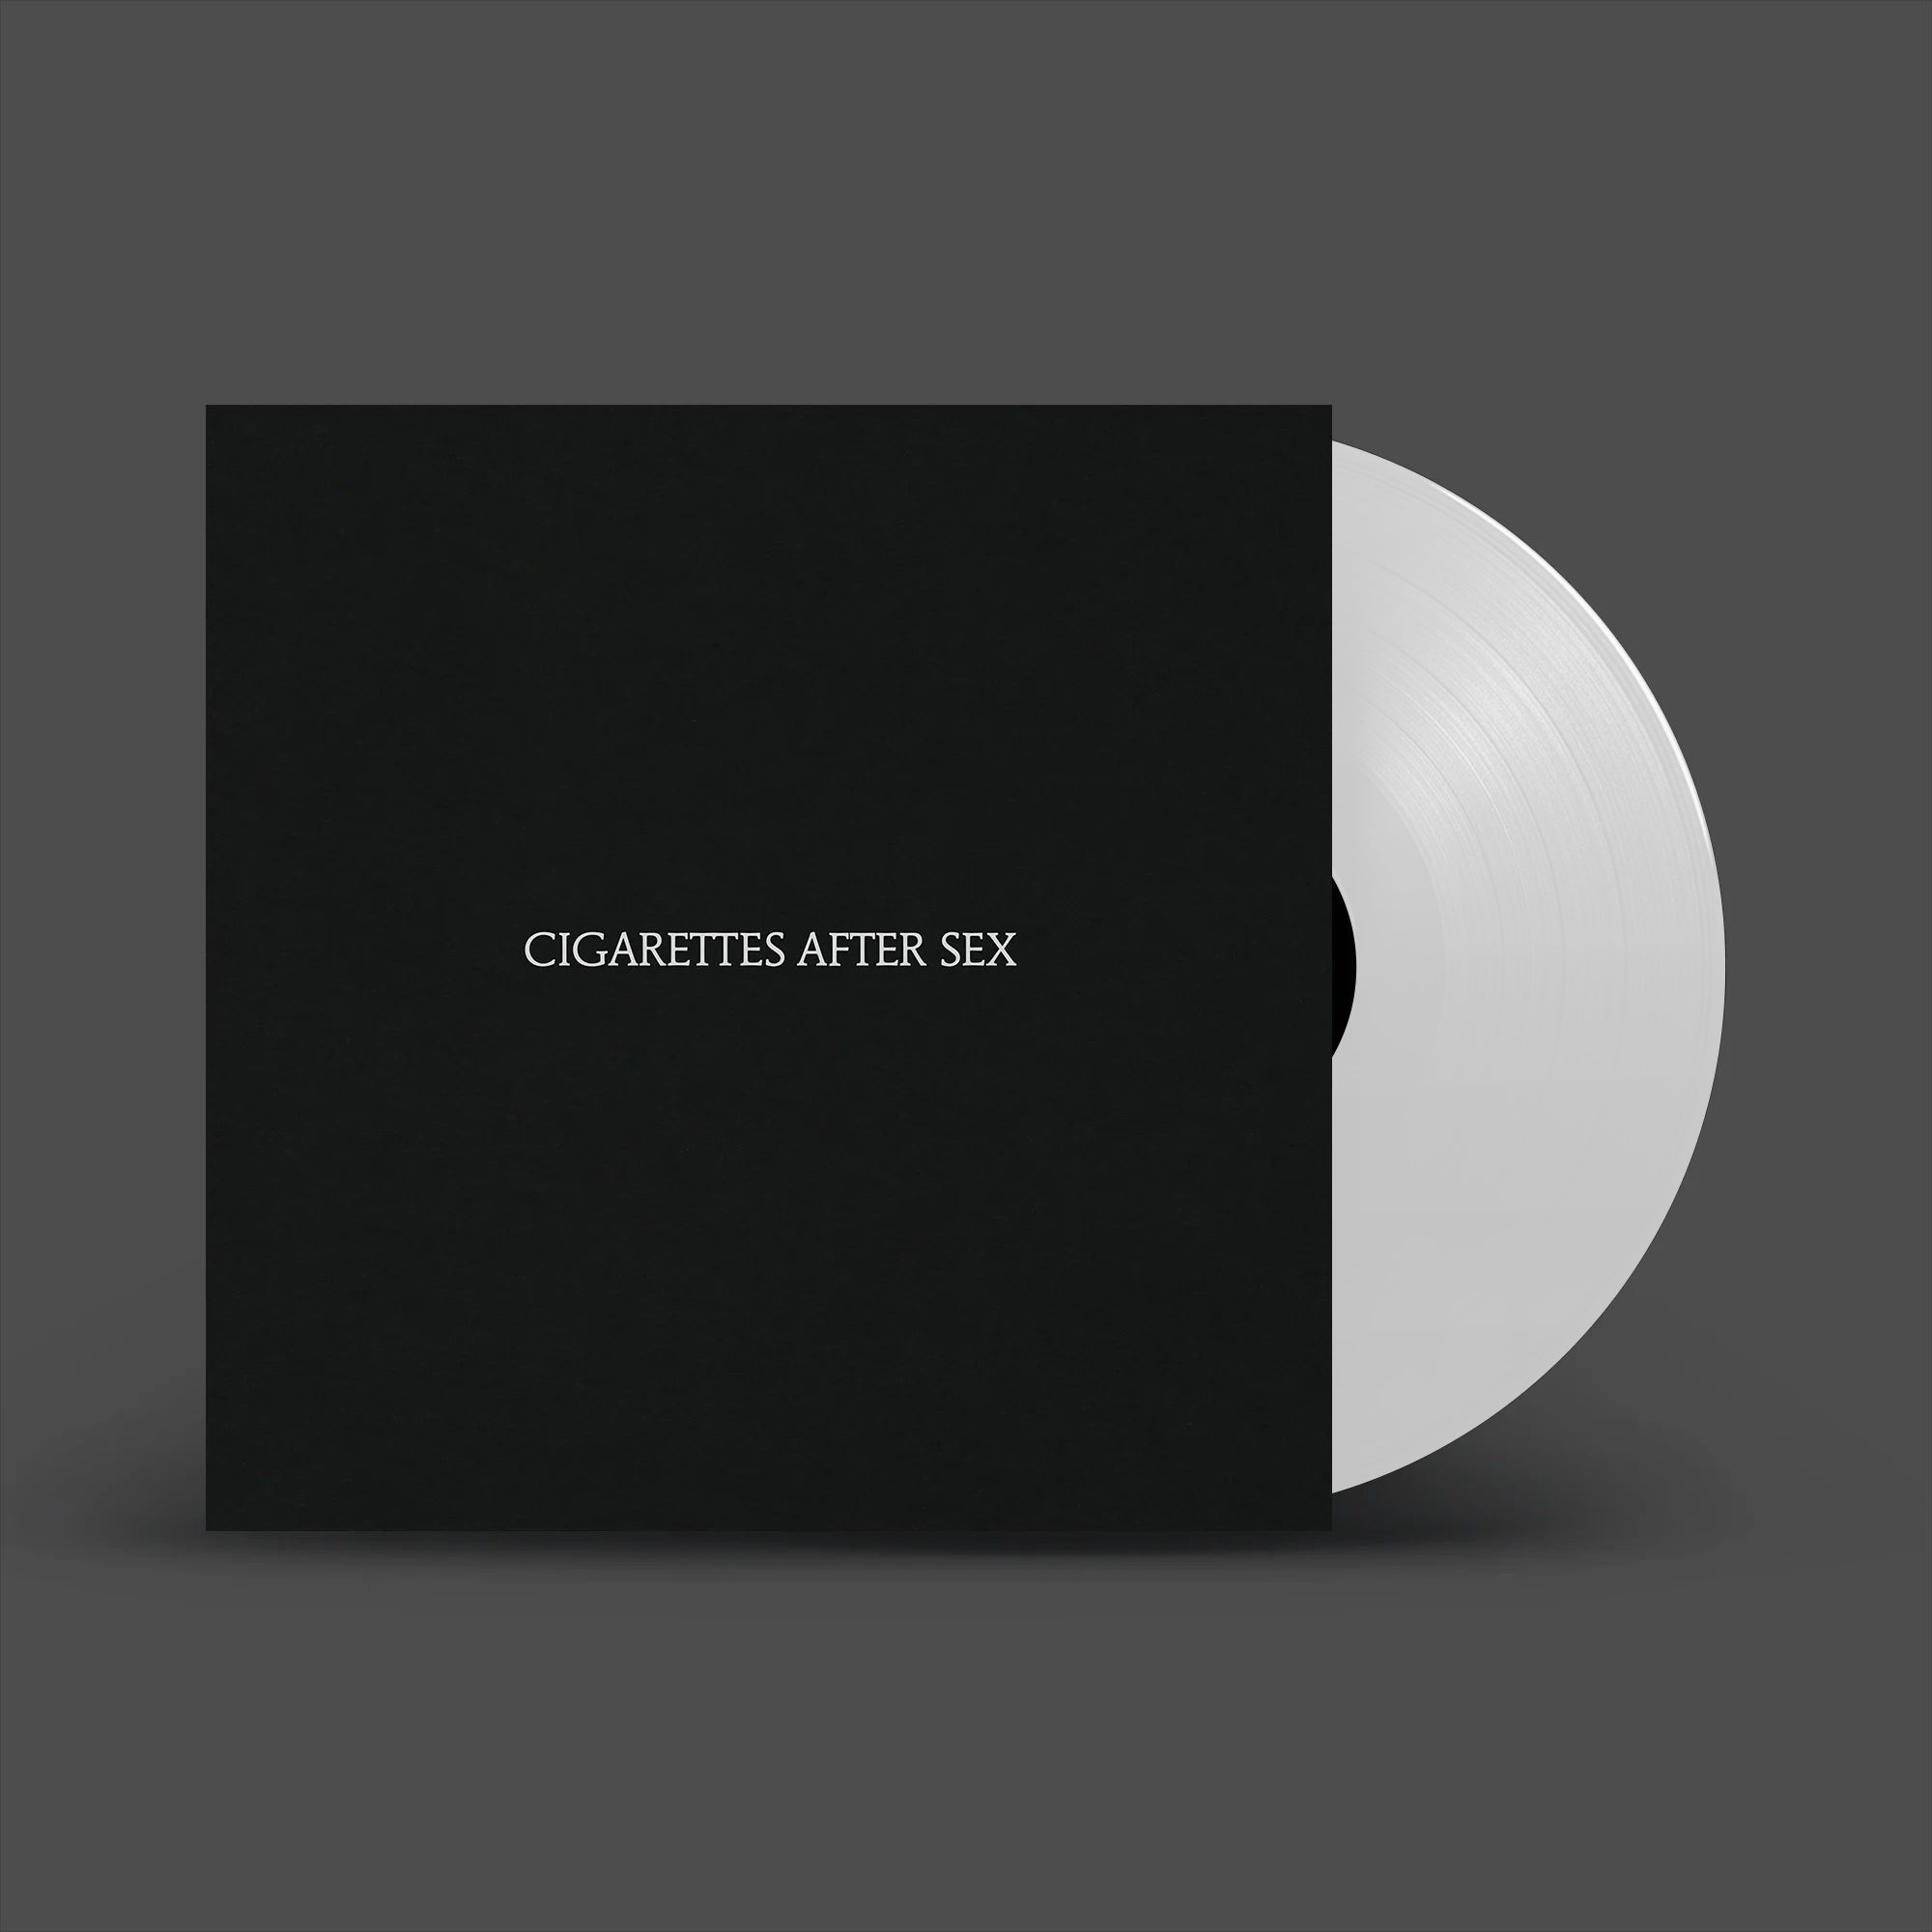 Limited Edition White 2xLP